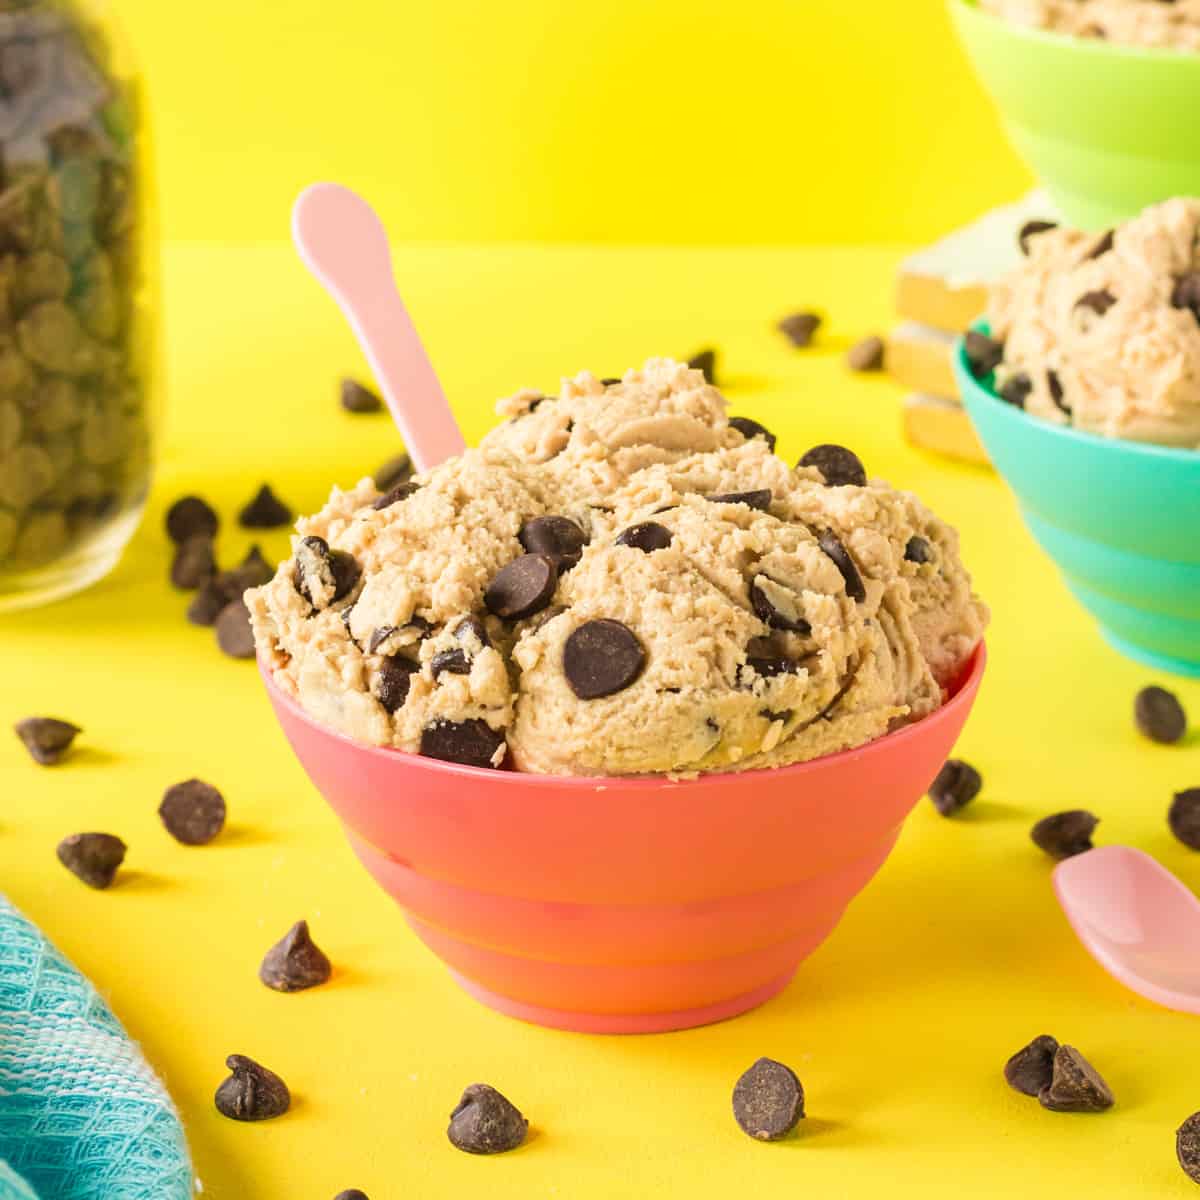 https://easydessertrecipes.com/wp-content/uploads/2022/06/Featured-Chocolate-Chip-Cookie-Dough-1.jpg